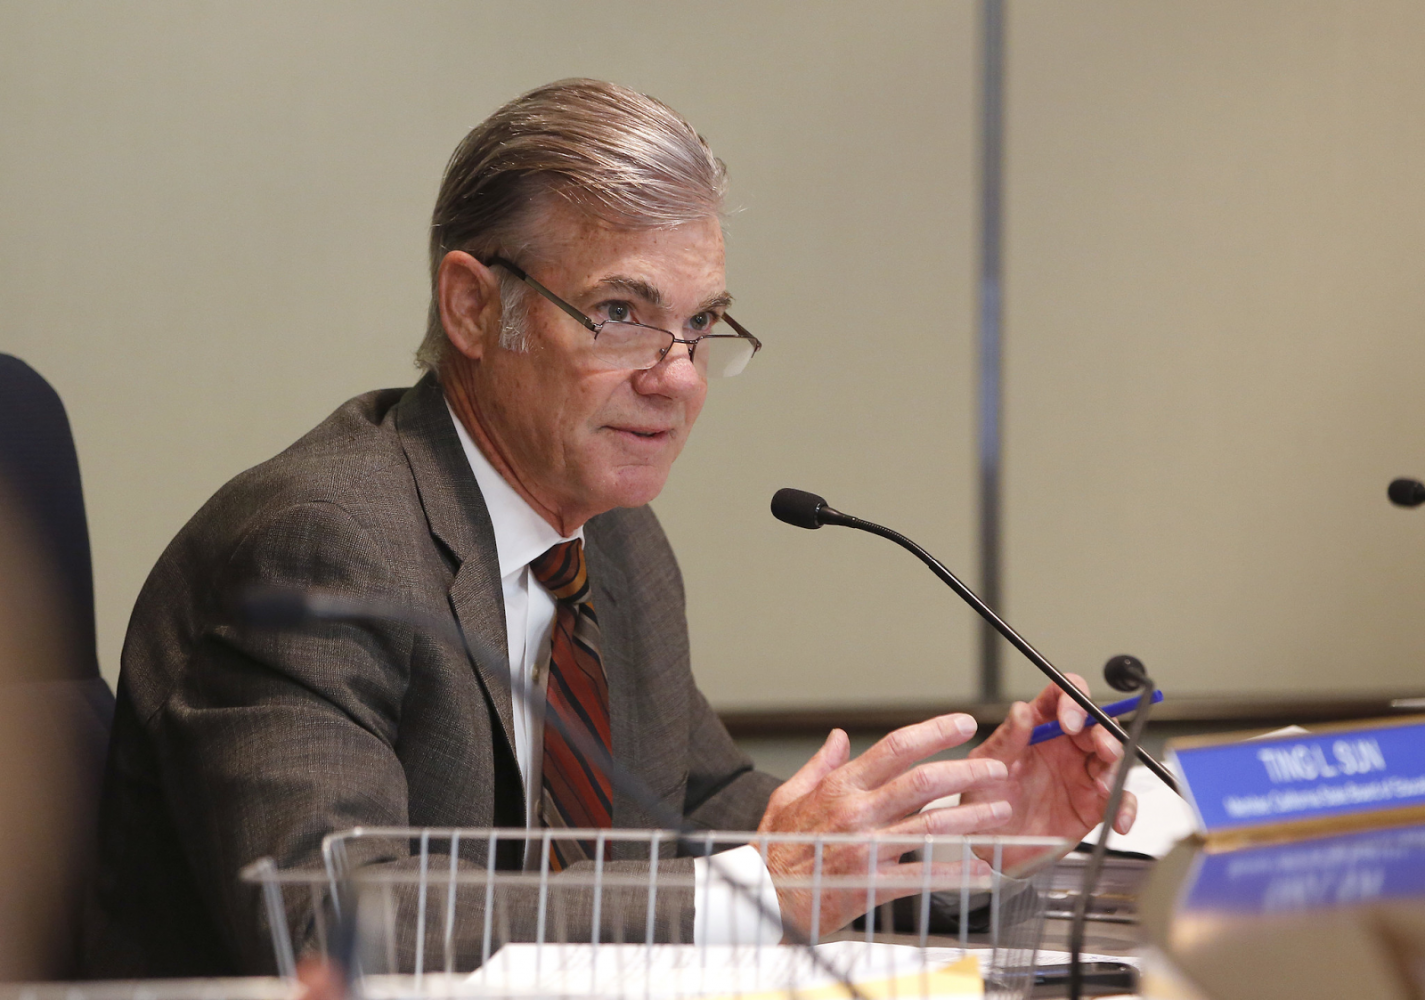  California State Superintendent of Public Instruction Tom Torlakson encouraged FUSD school districts and counties to release Safety Resolutions assuring the safety of all students, regardless of immigration status, ethnicity, etc. His letter can be found on the California Department of Education’s website.